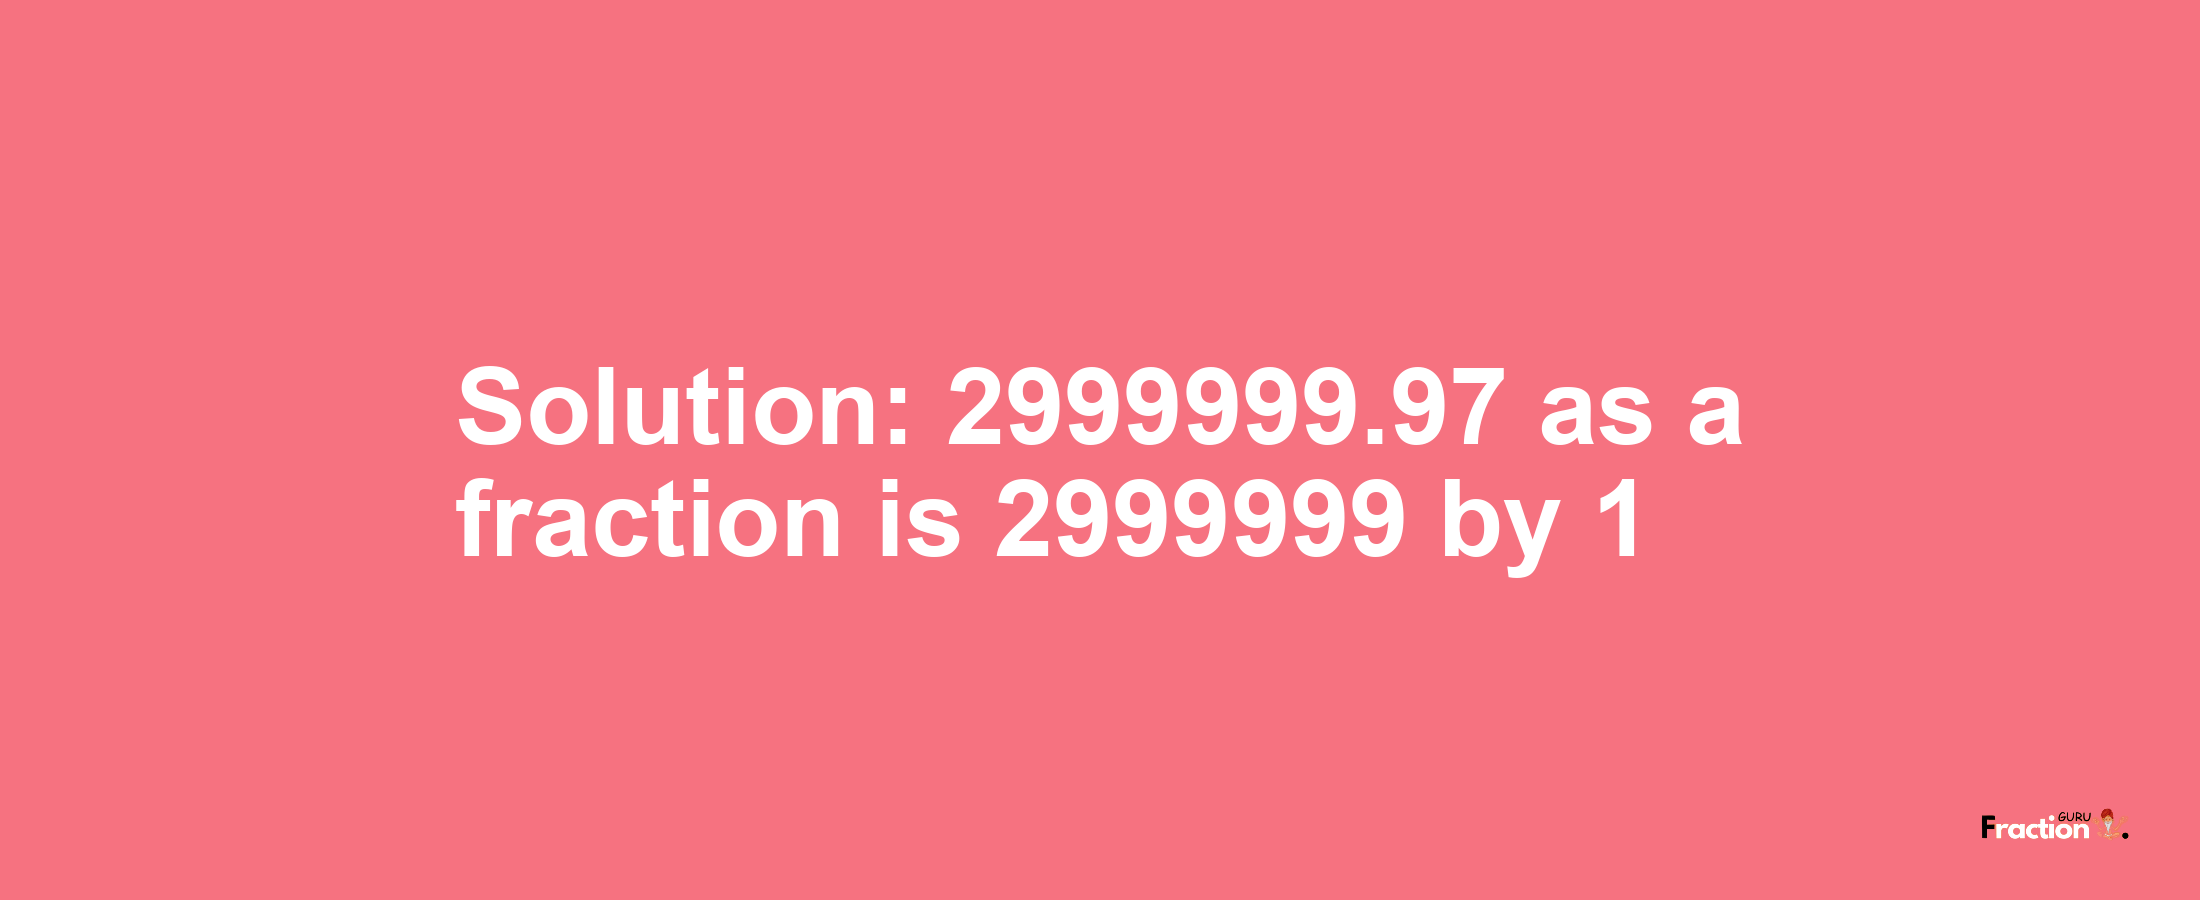 Solution:2999999.97 as a fraction is 2999999/1